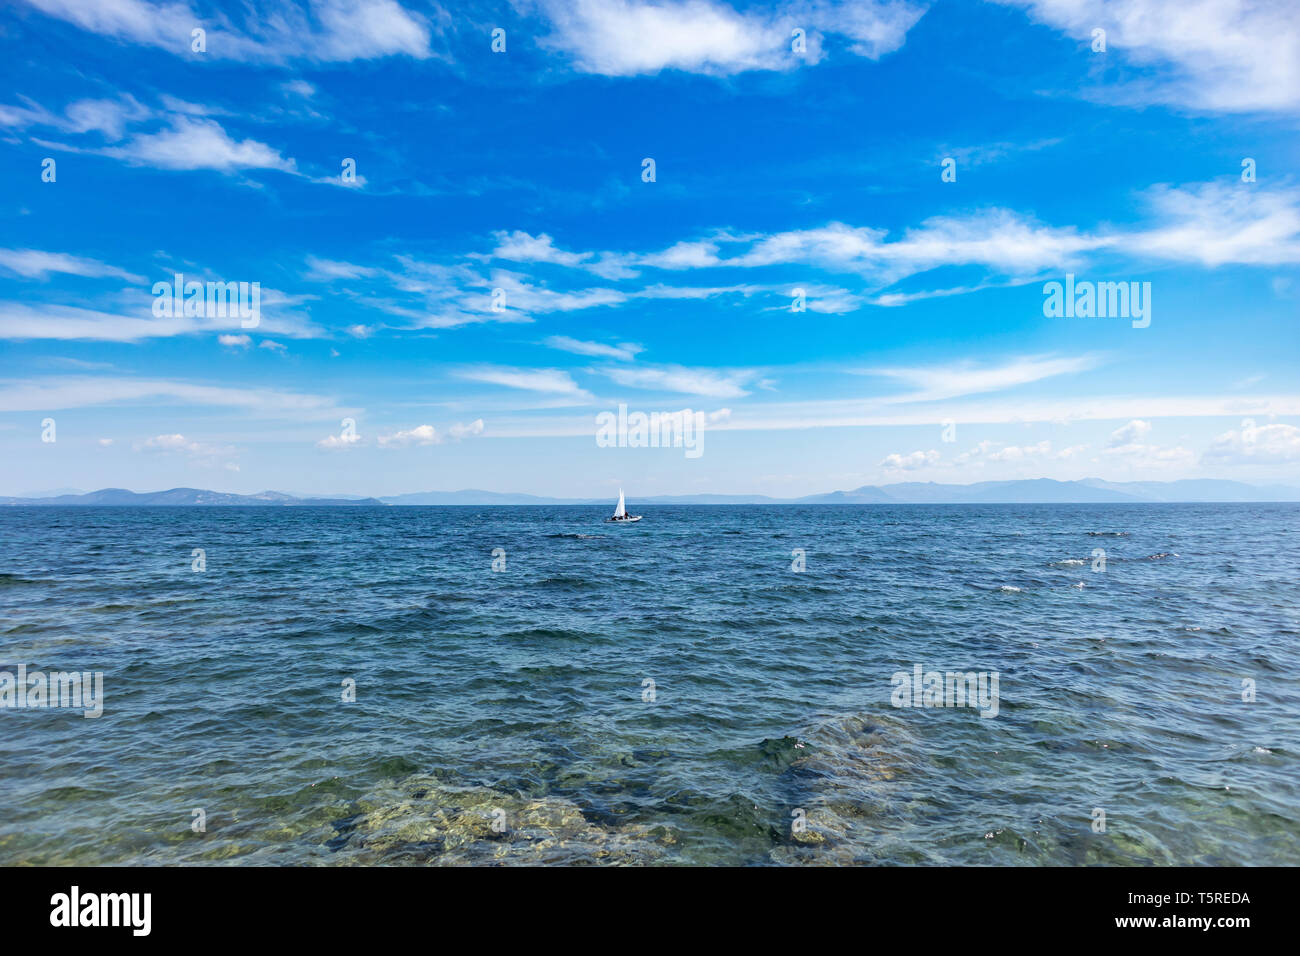 Sailing in Aegean sea, Greece. Small optimist boat with white sail, blue sky and sea background Stock Photo